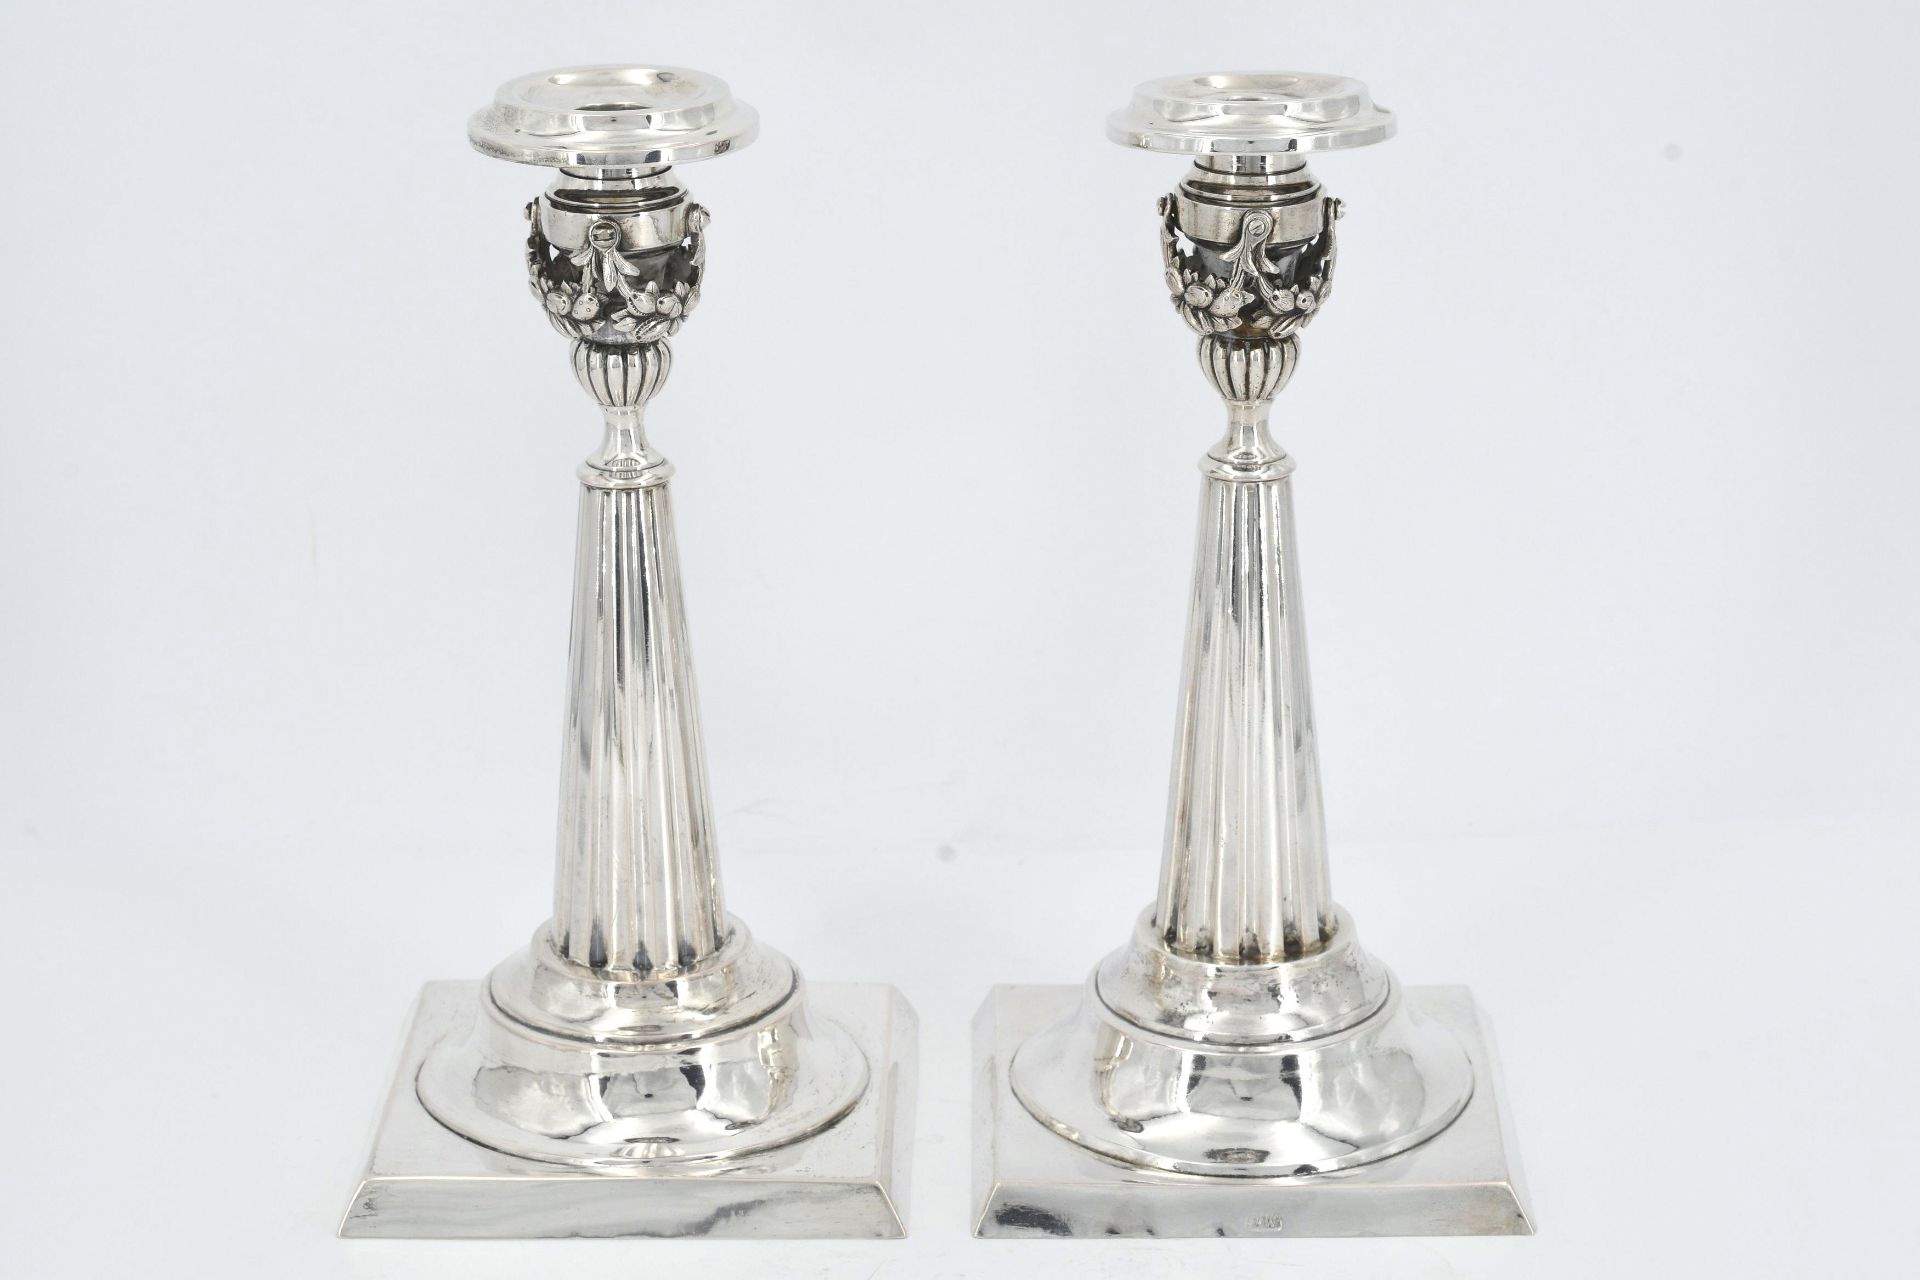 Pair of silver candlesticks with fluted shaft and festoons - Image 2 of 6